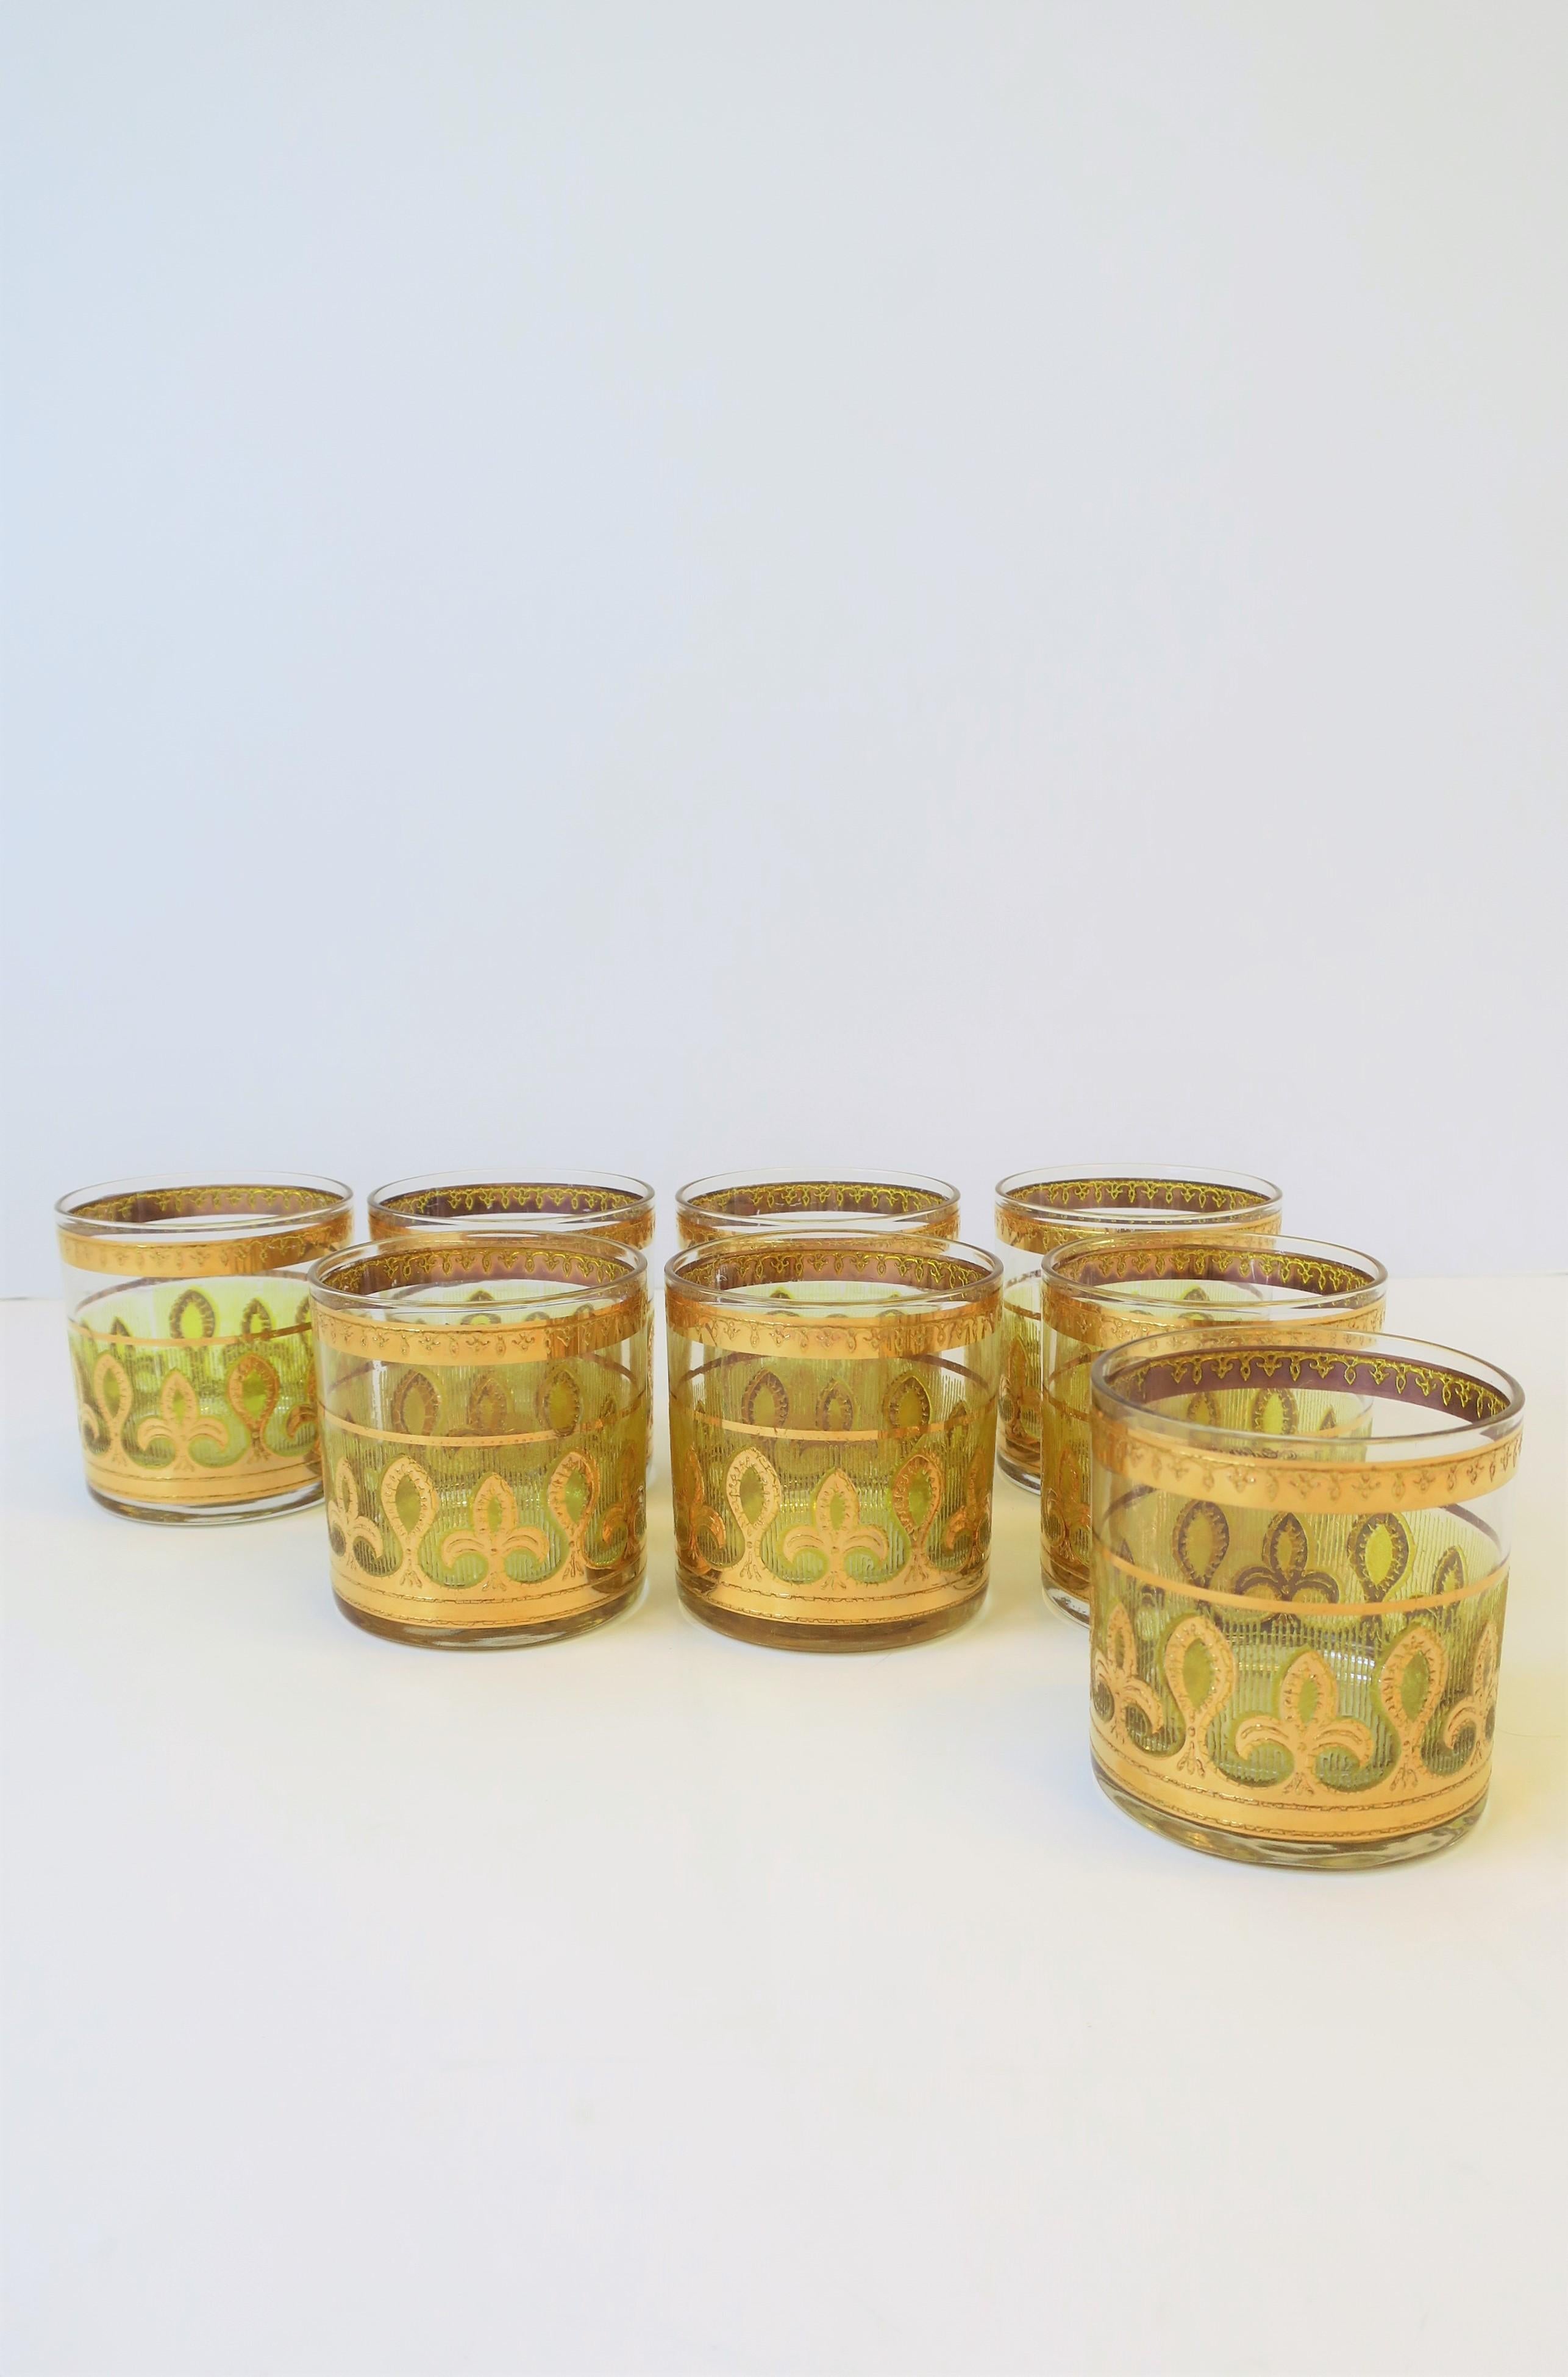 A beautiful set of 8 vintage mid-20th century canary yellow and 22-karat gold lowball rocks' cocktail glasses with a Fleur-de-lis design, in the Hollywood Regency style, circa 1960s. U.S. Great for summer or holiday entertaining, bar cart or bar